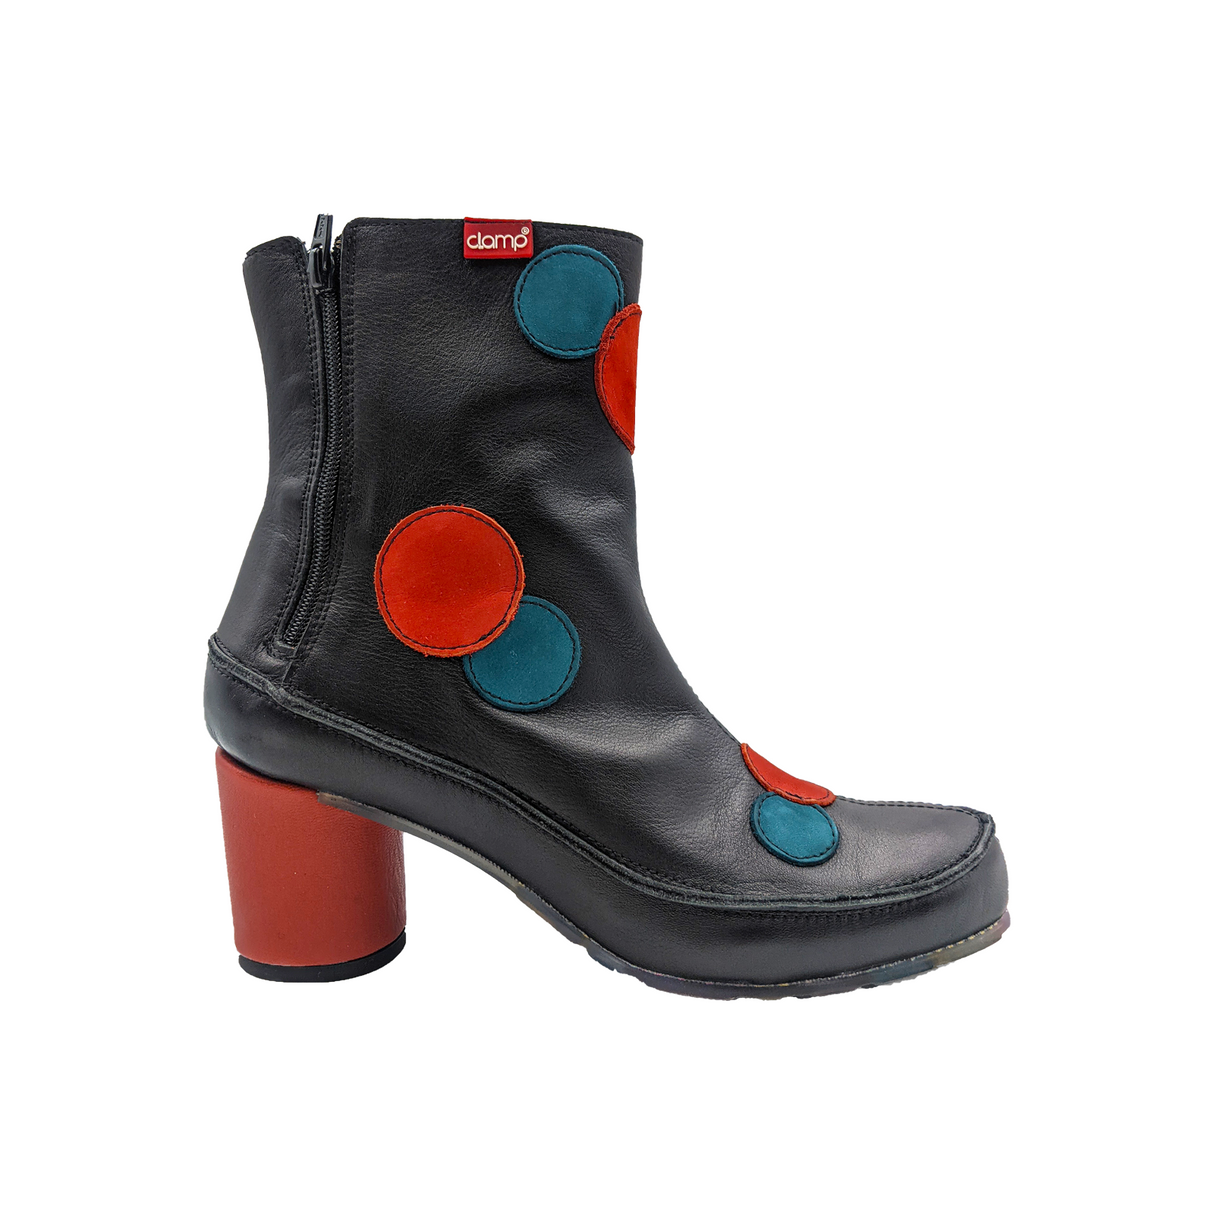 Clamp Chelby Mid Boot (Women) - Black/Chili/Cobalt Boots - Fashion - Mid Boot - The Heel Shoe Fitters